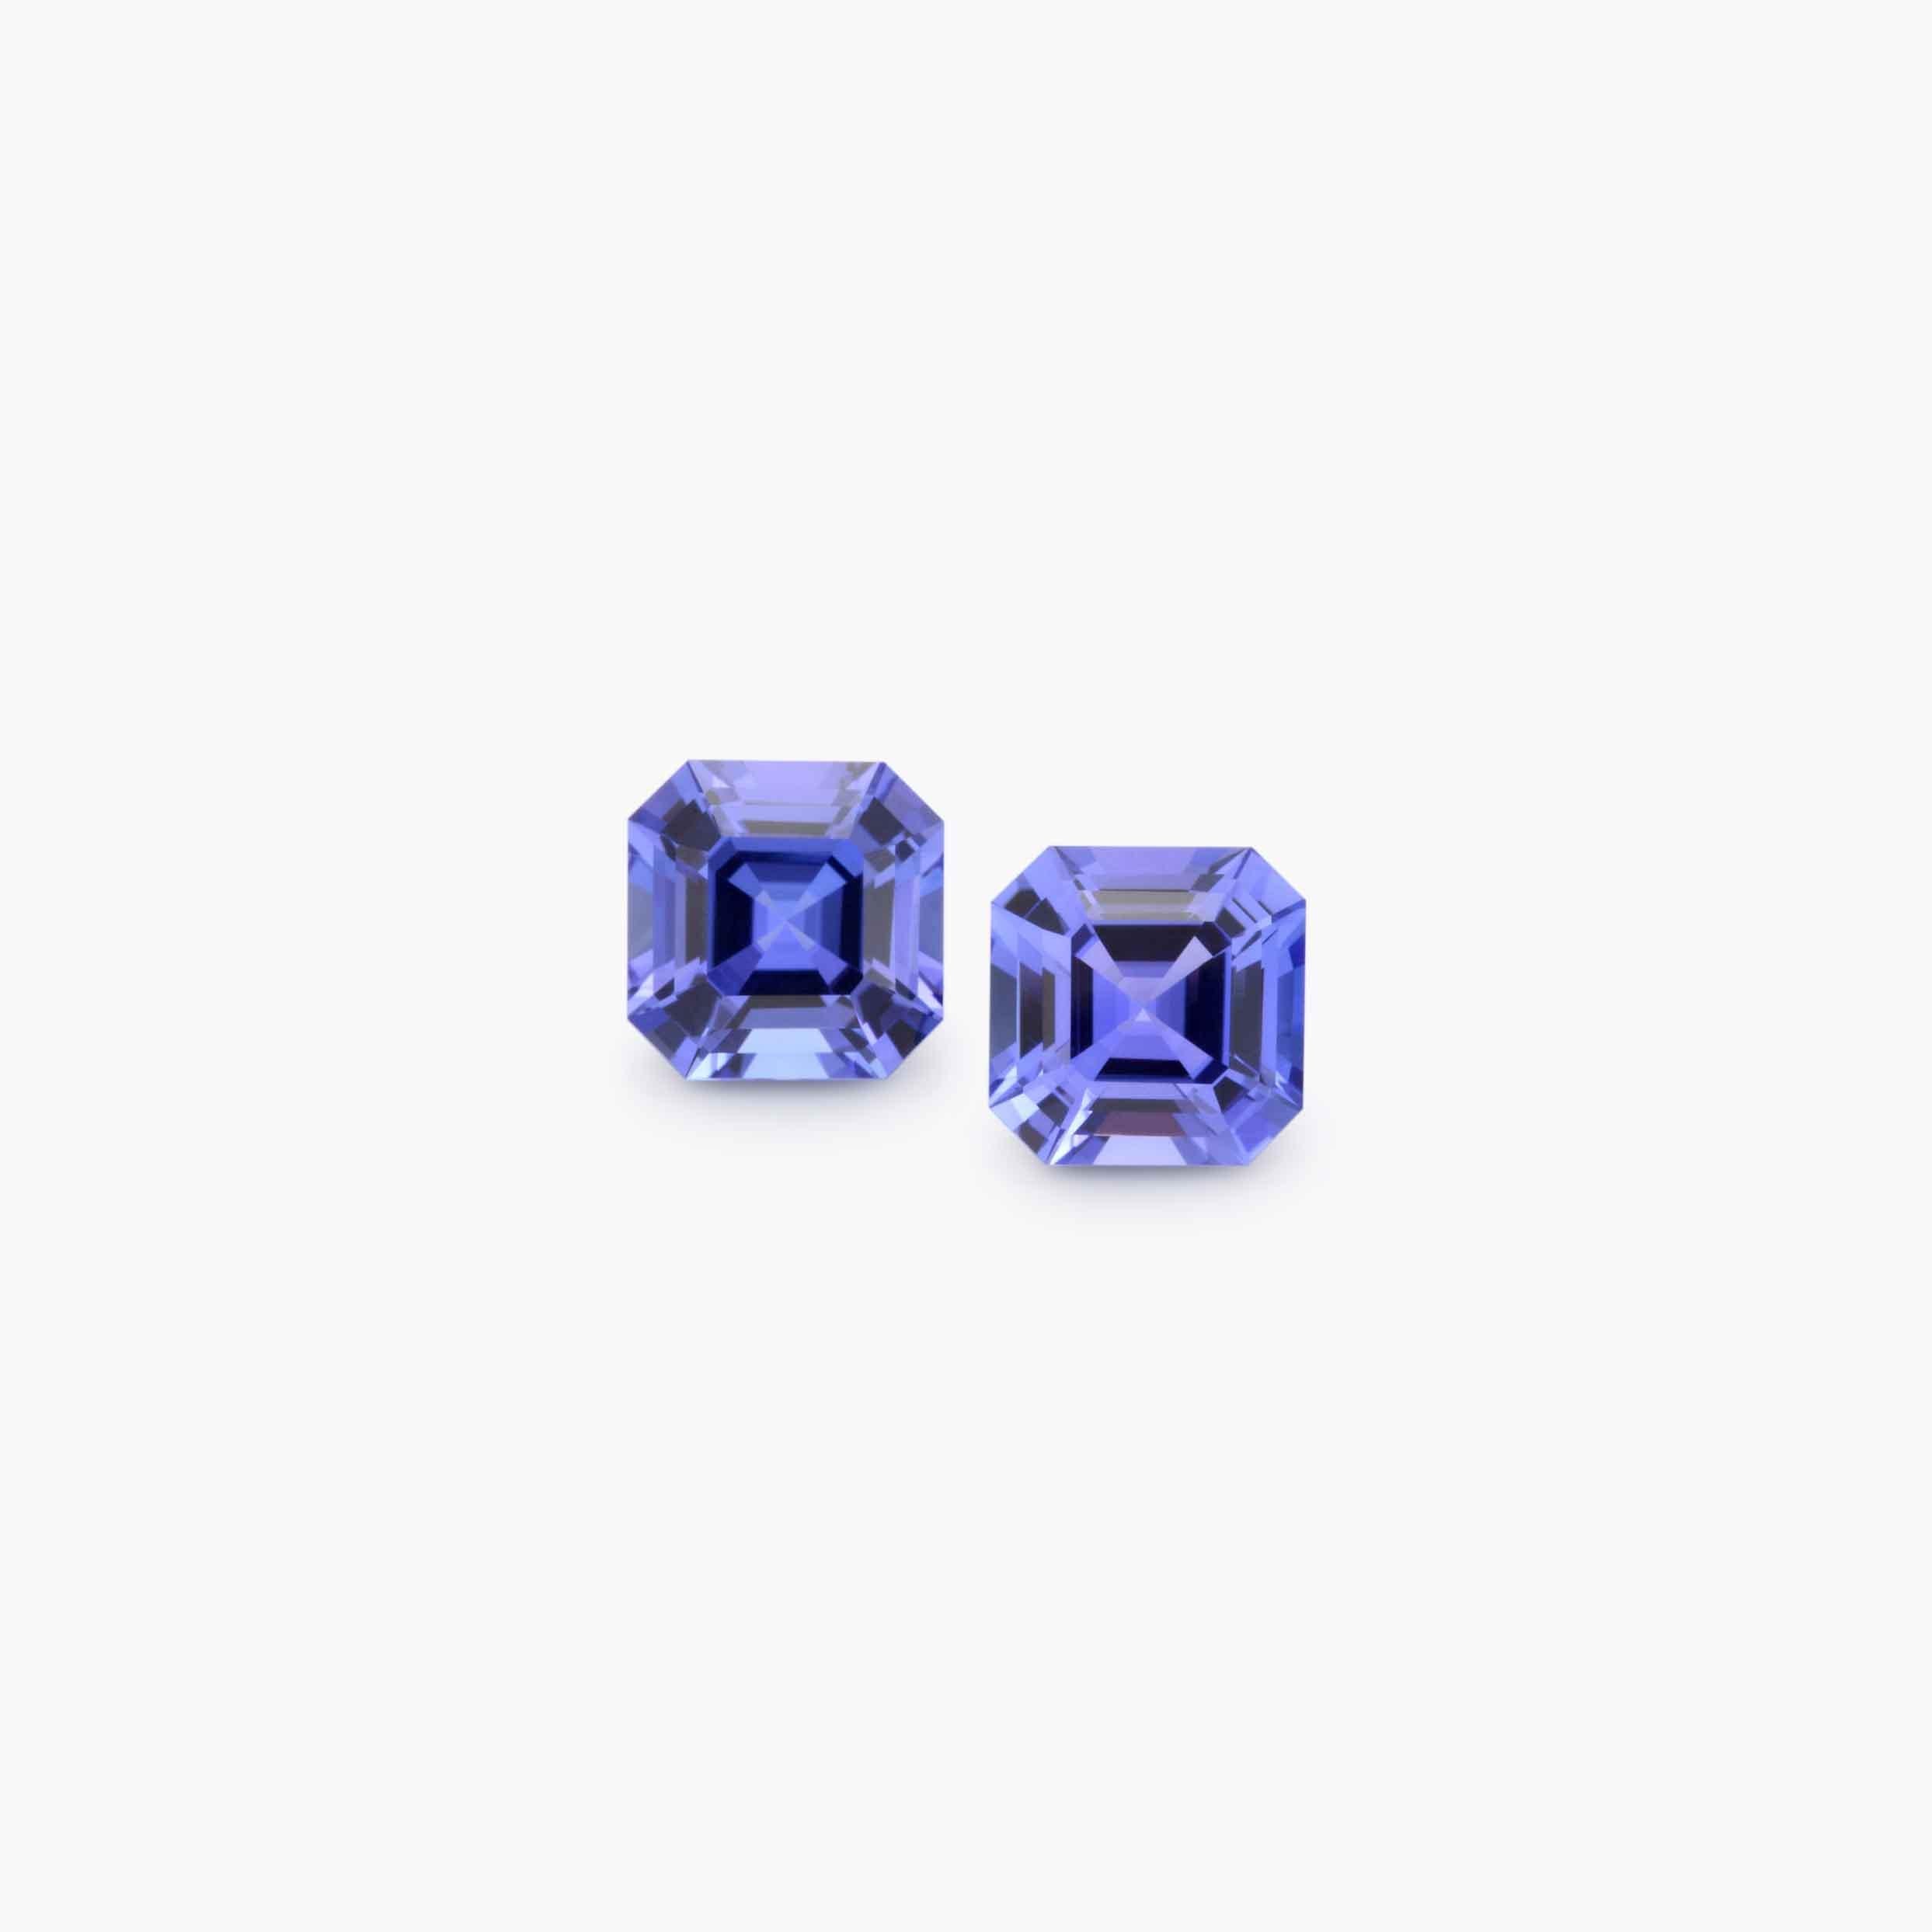 Superb Tanzanite square octagon pair totaling 2.64 carats, offered unmounted for a spectacular custom pair of earrings.
Dimensions: 6.7 x 6.6 x 4.4 mm.
Returns are accepted and paid by us within 7 days of delivery.
We offer supreme custom jewelry